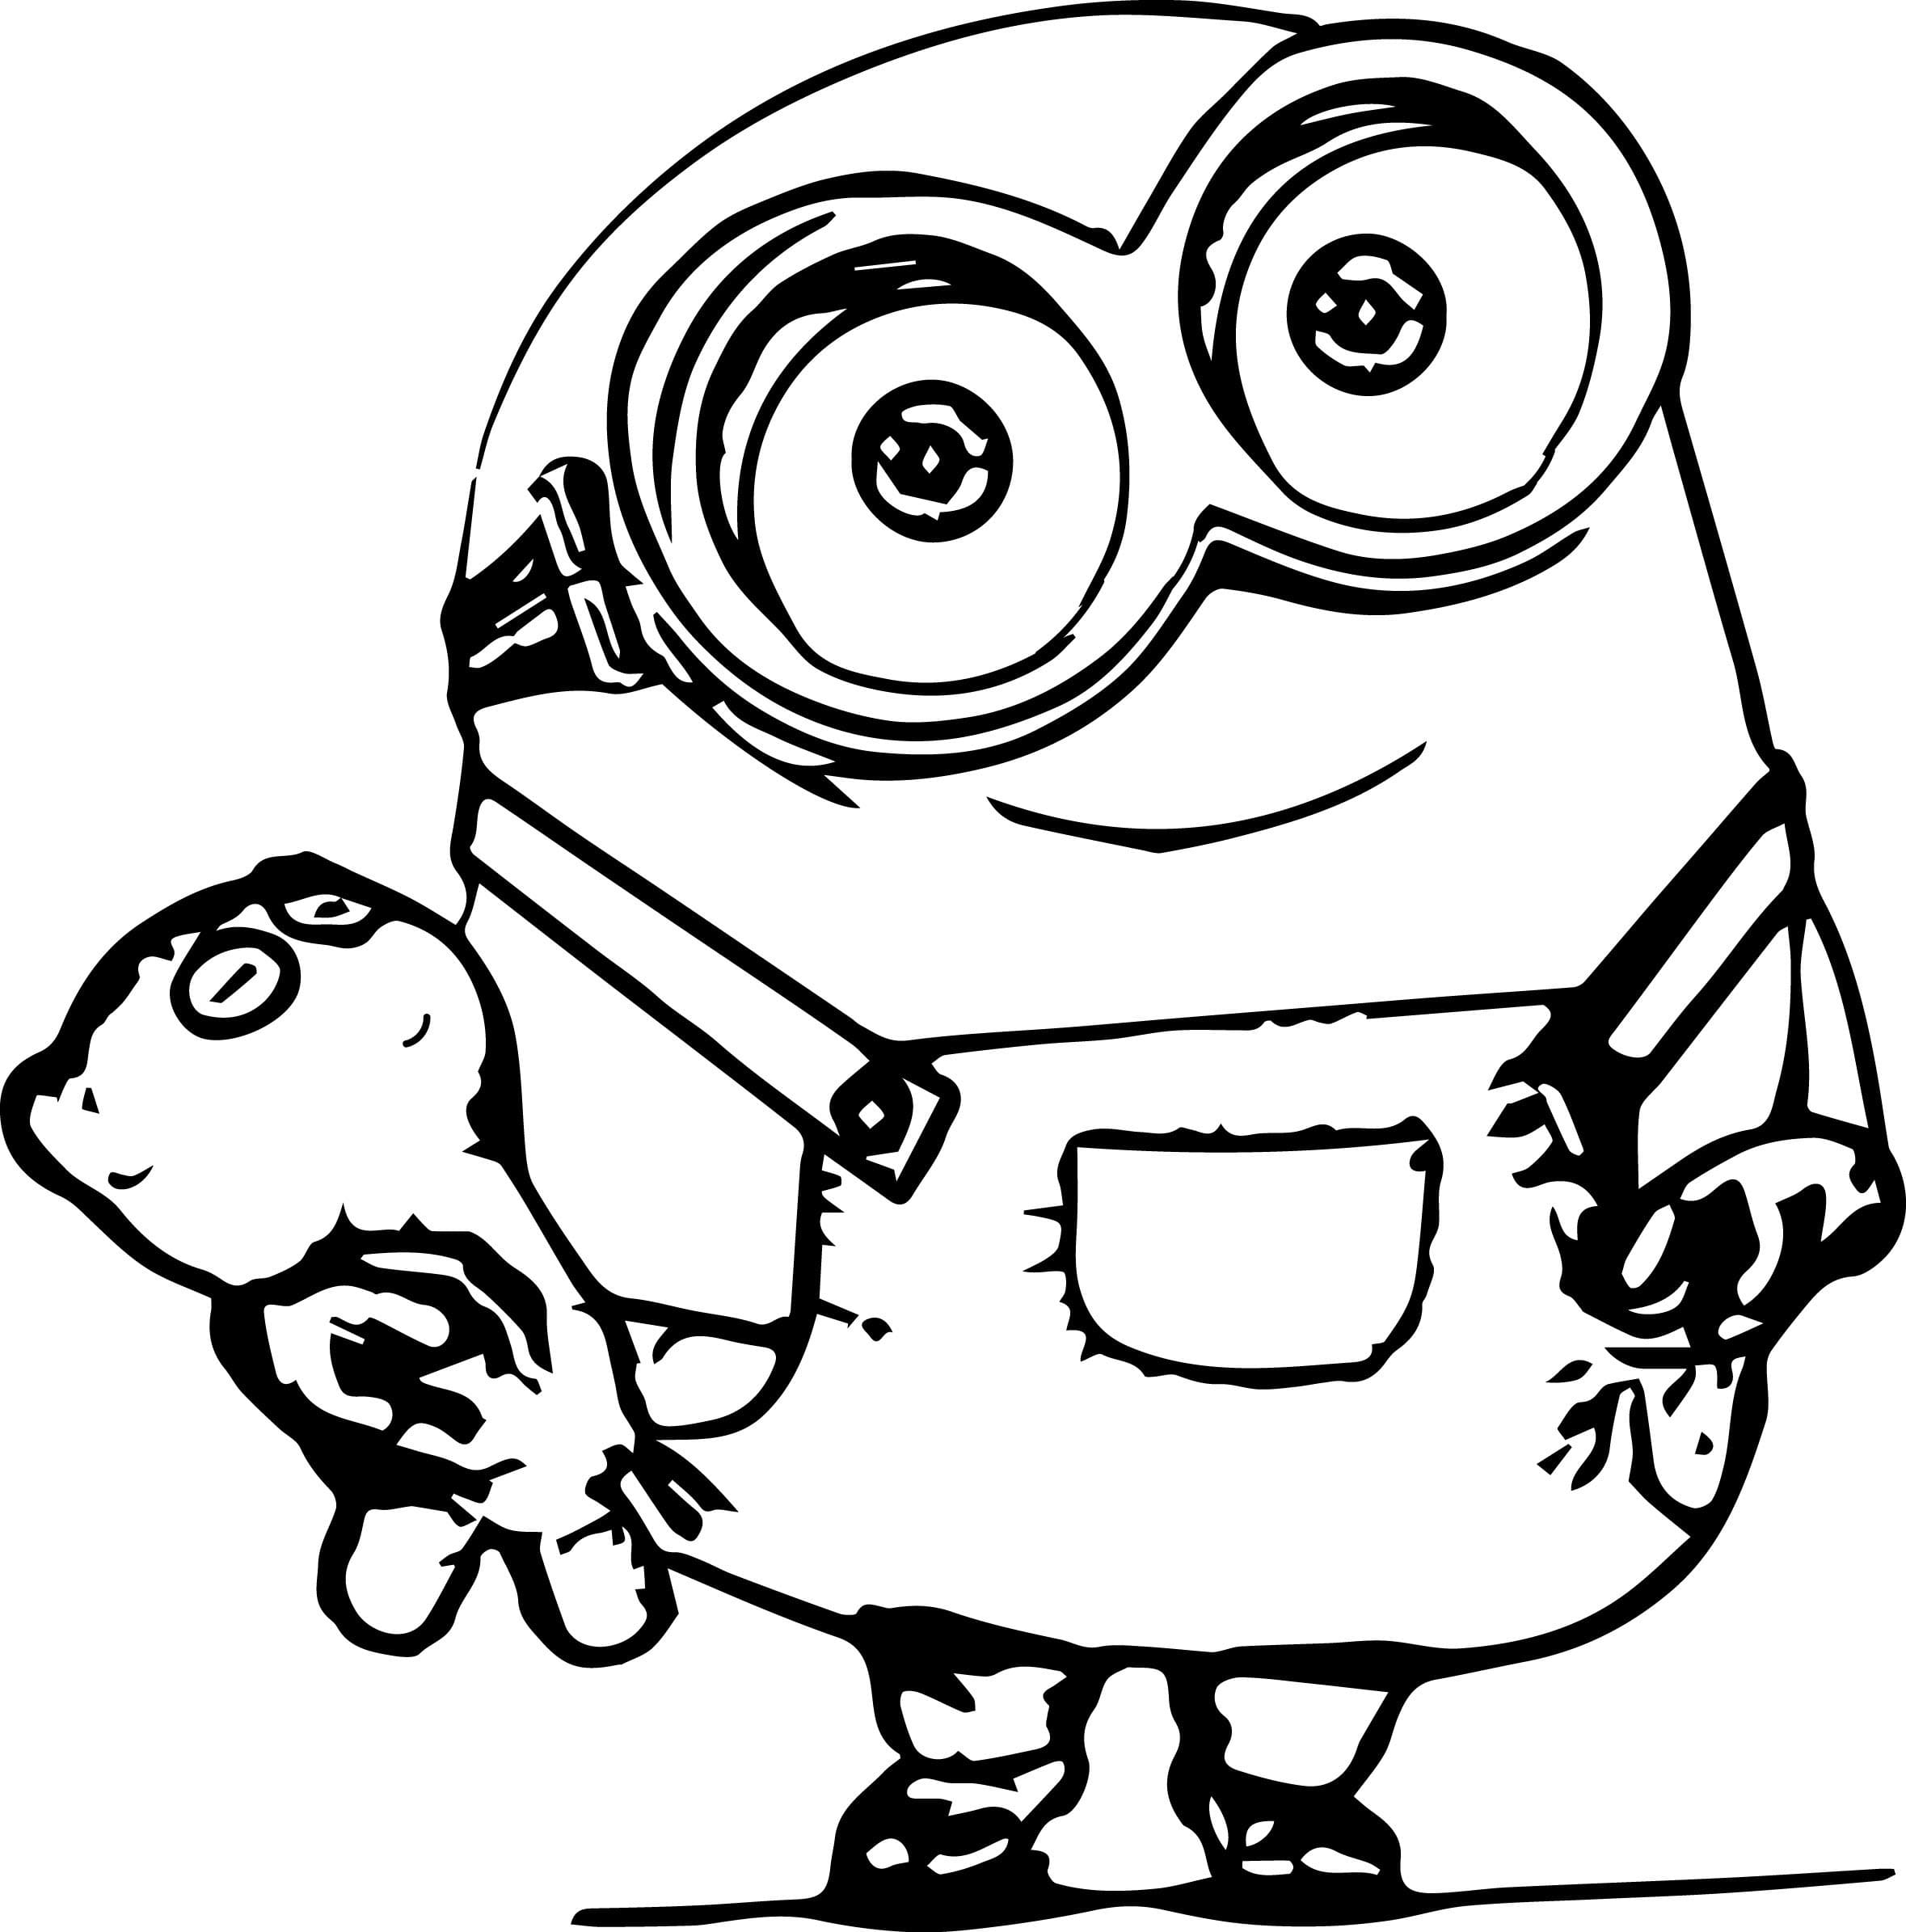 Drawing minion holding teddy bear coloring page